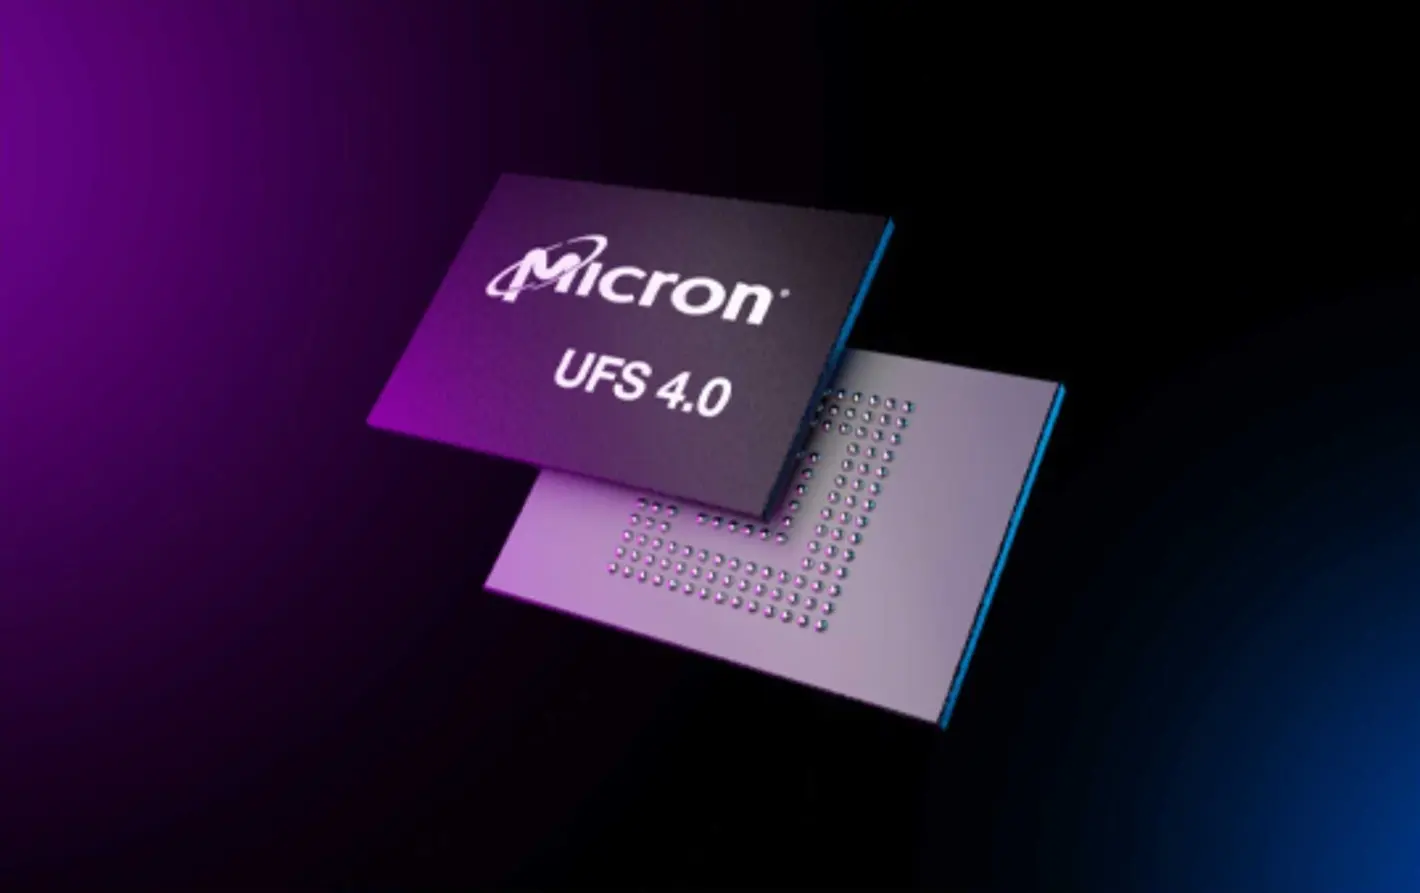 Featured image for Micron unveils the world's smallest UFS 4.0 storage chip